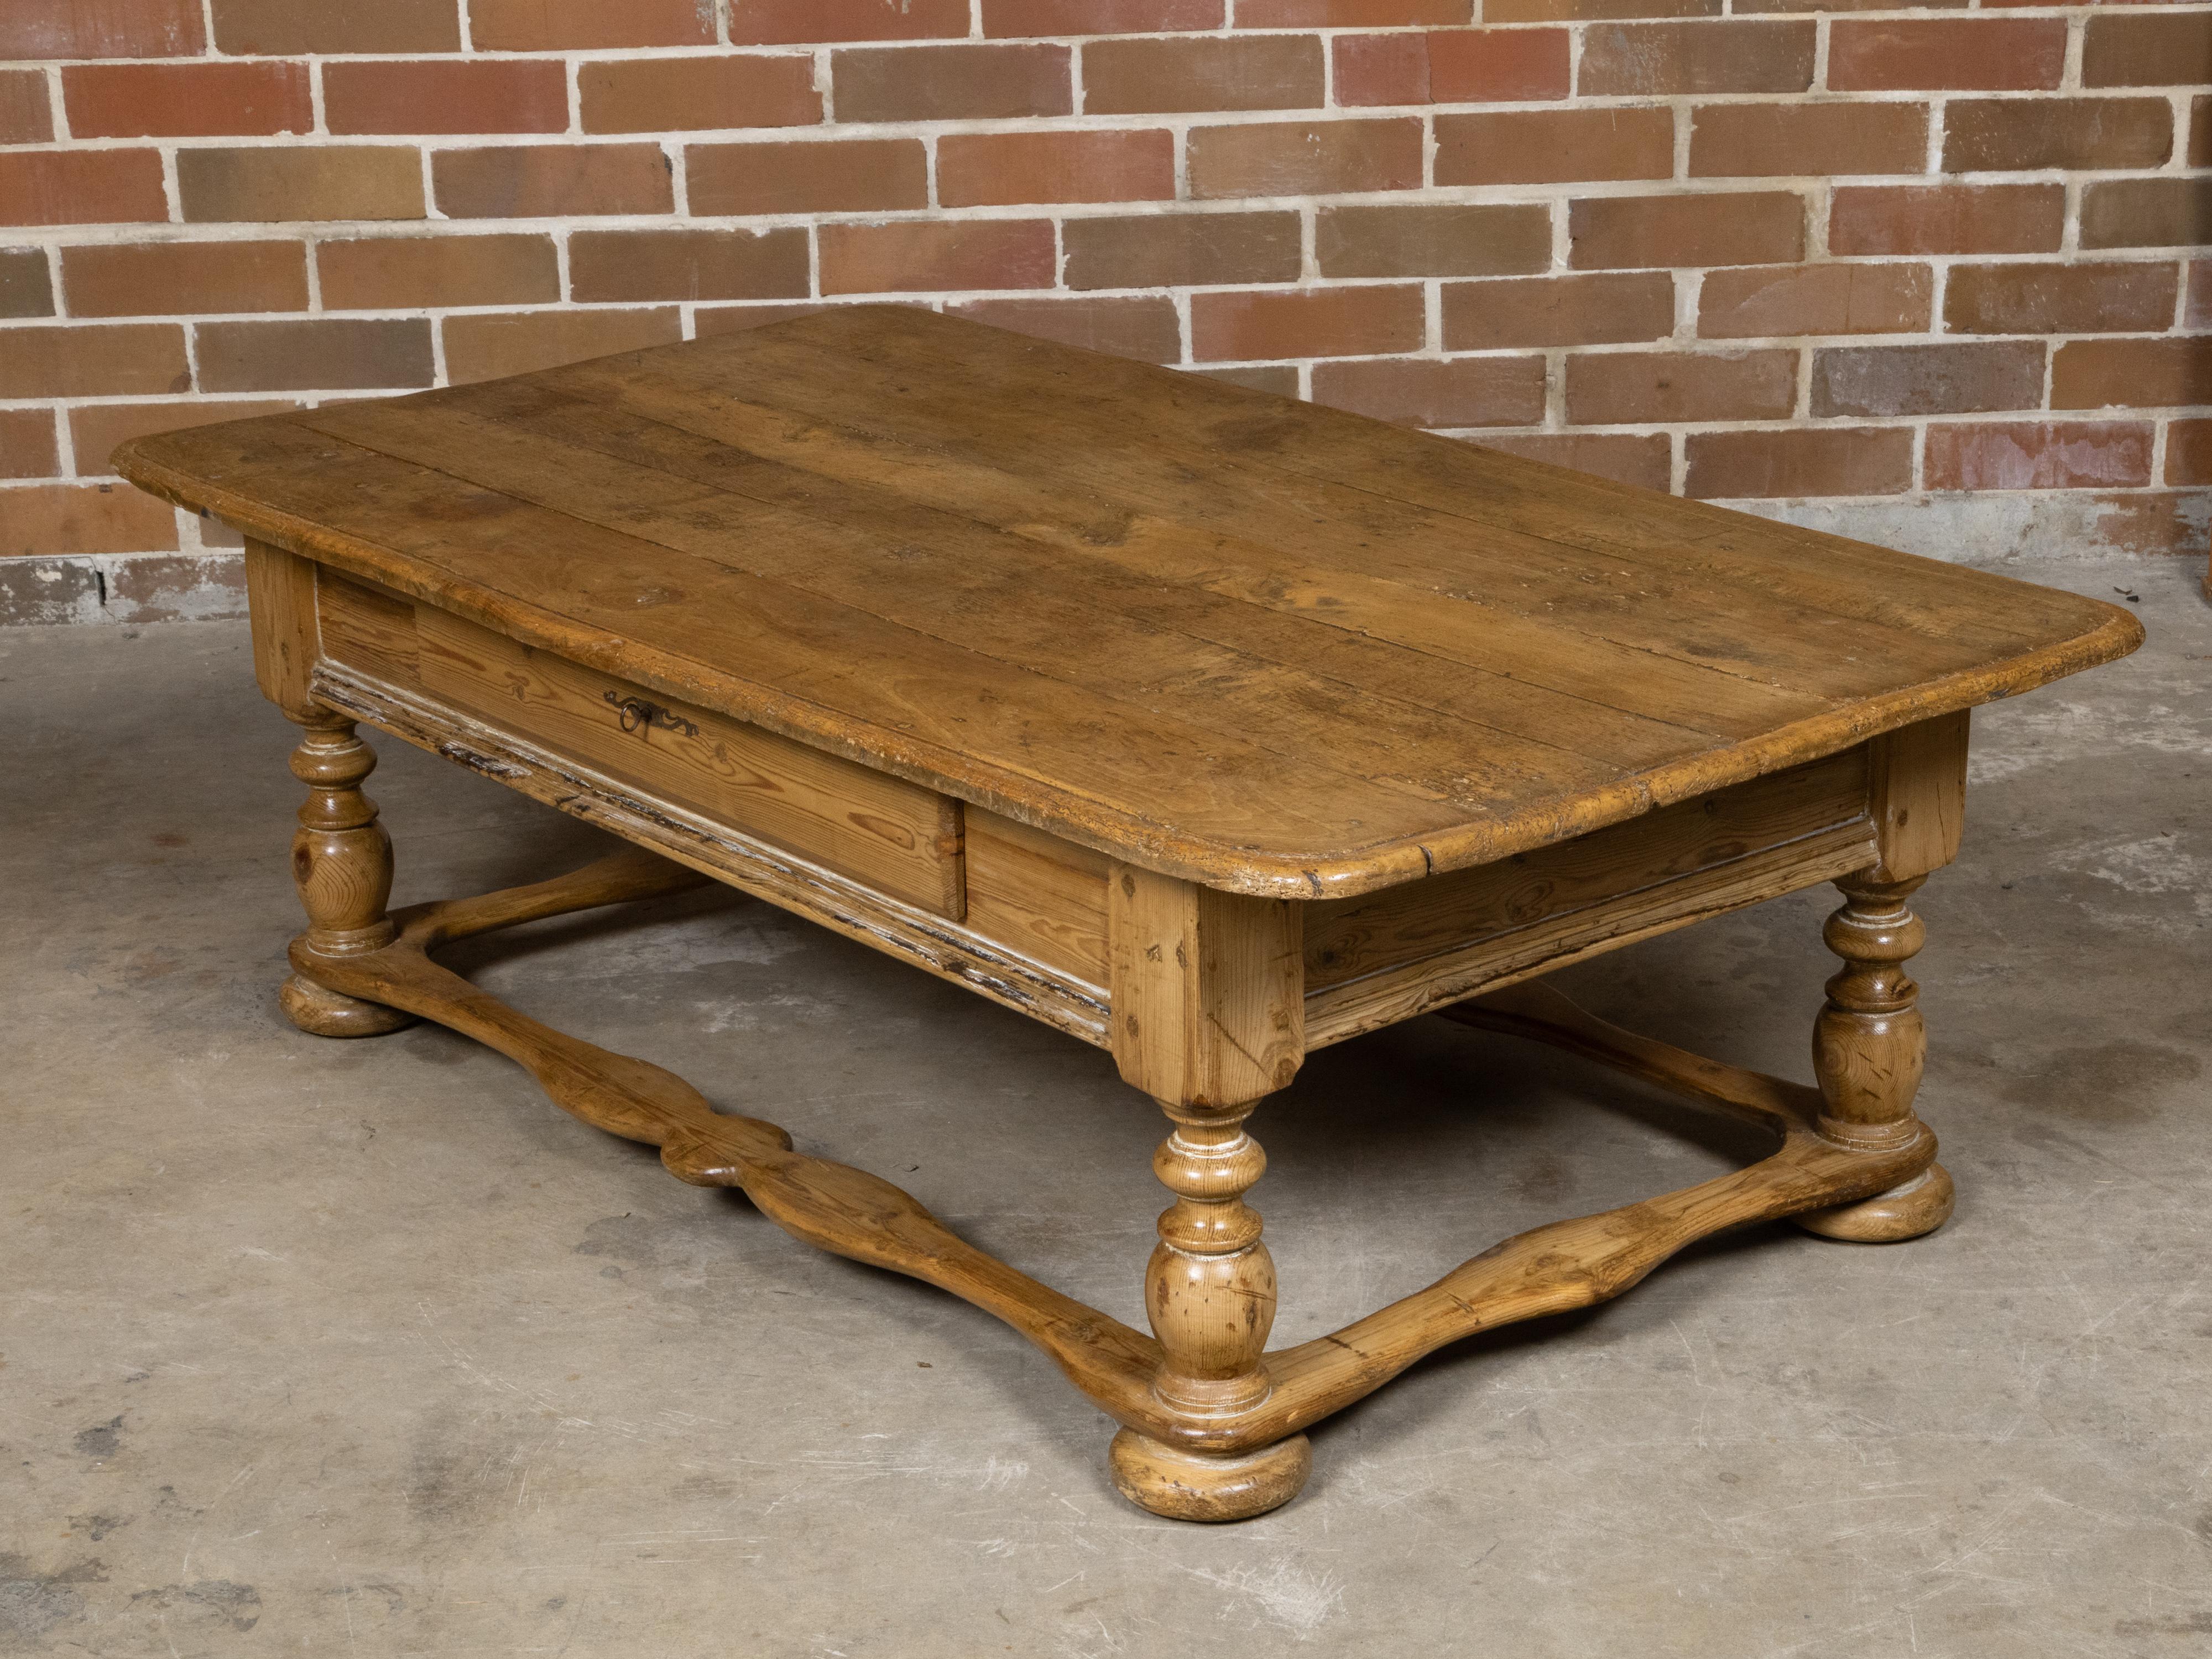 A Baroque English pine coffee table from the 19th century with turned legs, single drawer and carved side stretchers. This 19th-century Baroque English pine coffee table exudes a distinct rustic charm, highlighted by its weathered appearance and